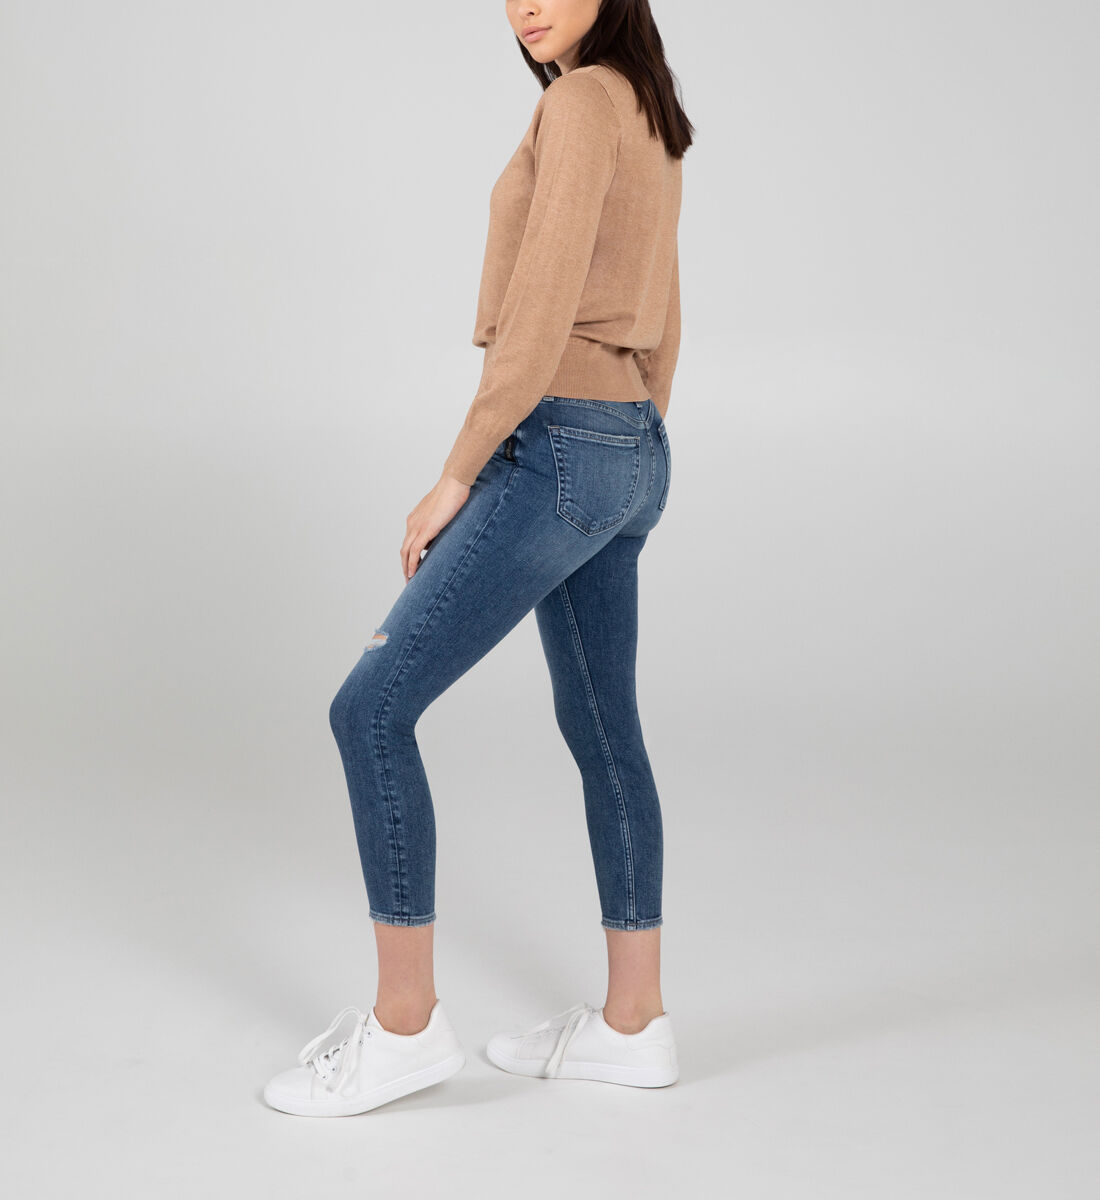 Most Wanted Mid Rise Skinny Jeans Side